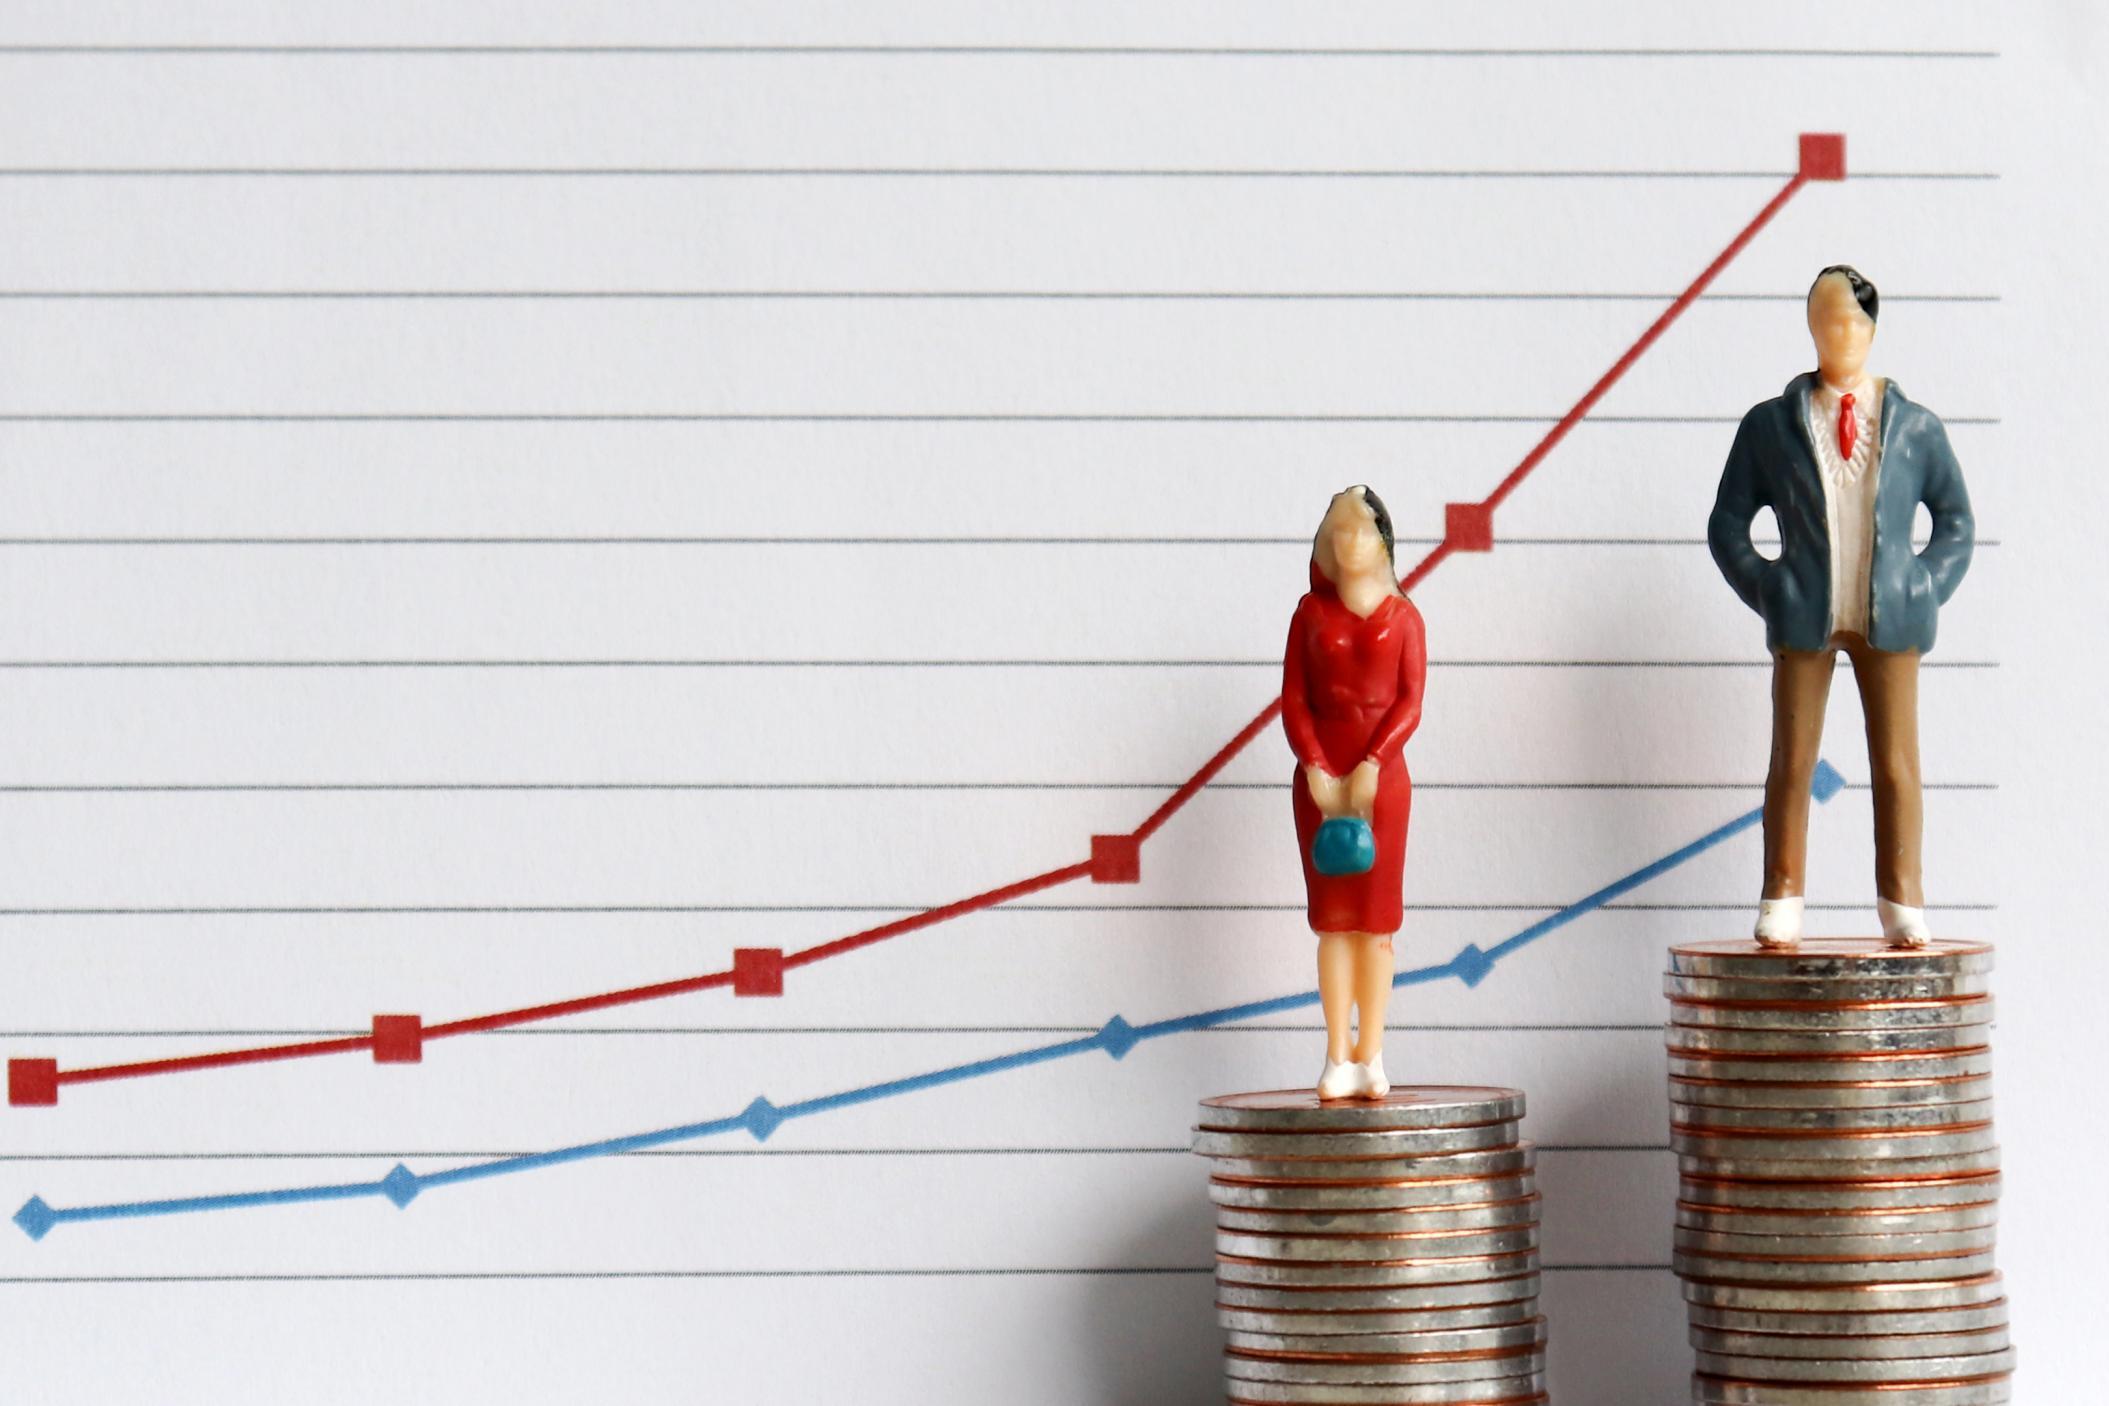 The gender pay gap could widen